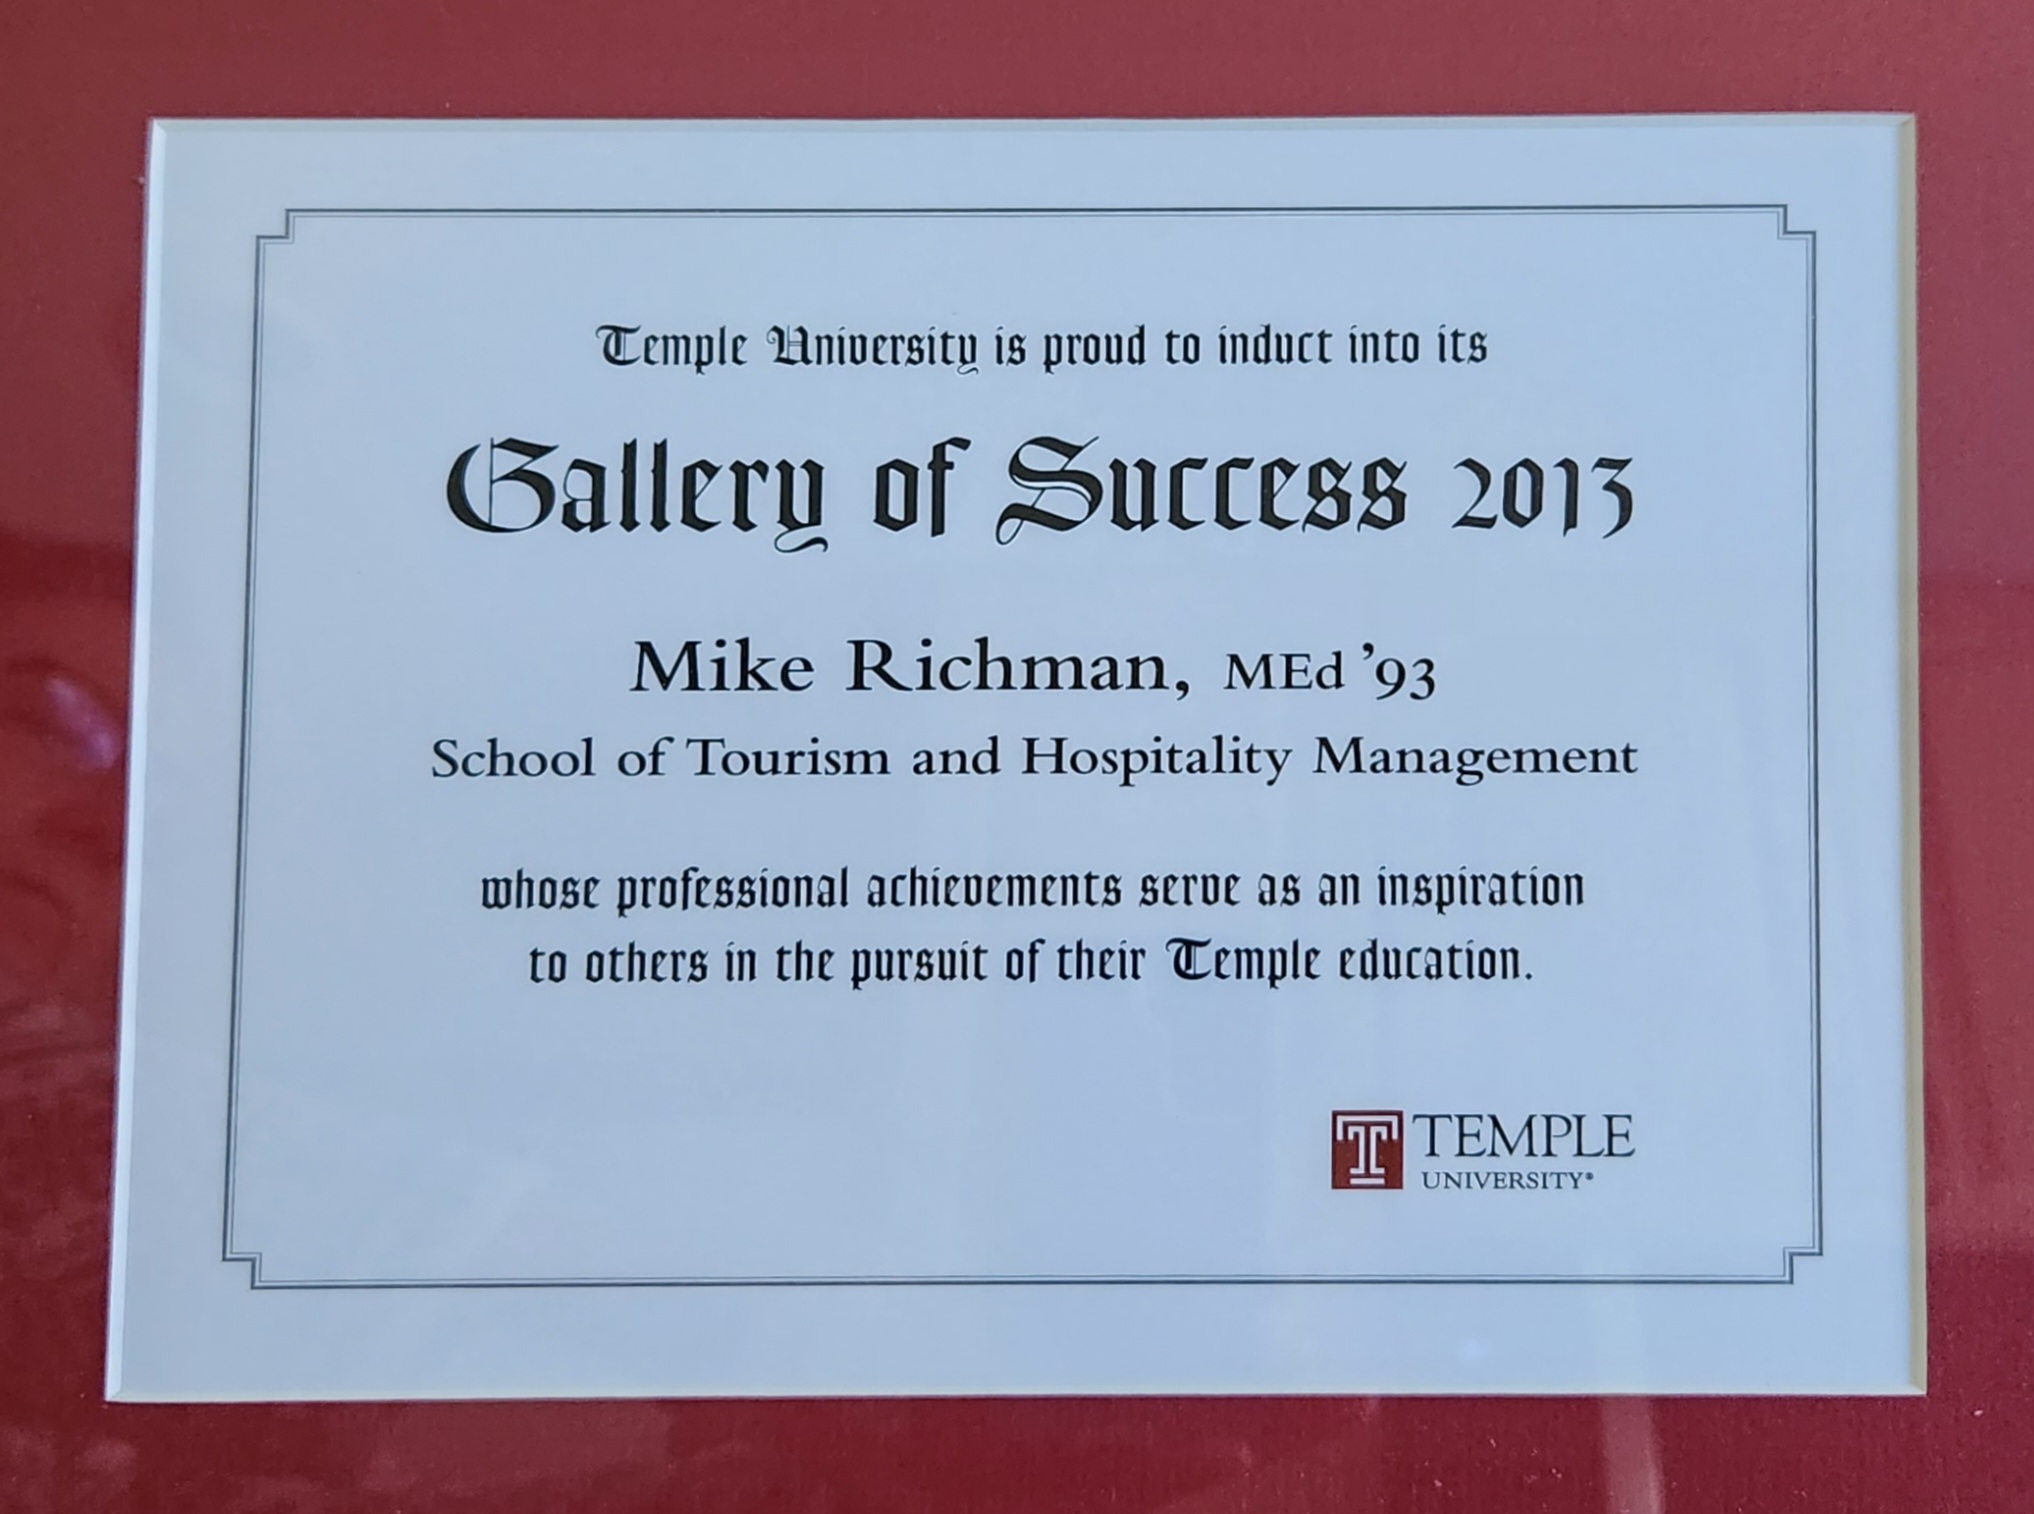 In 2013, Mike Richman was inducted into the Temple University Gallery of Success. He represented Temple's School of Tourism and Hospitality Management.